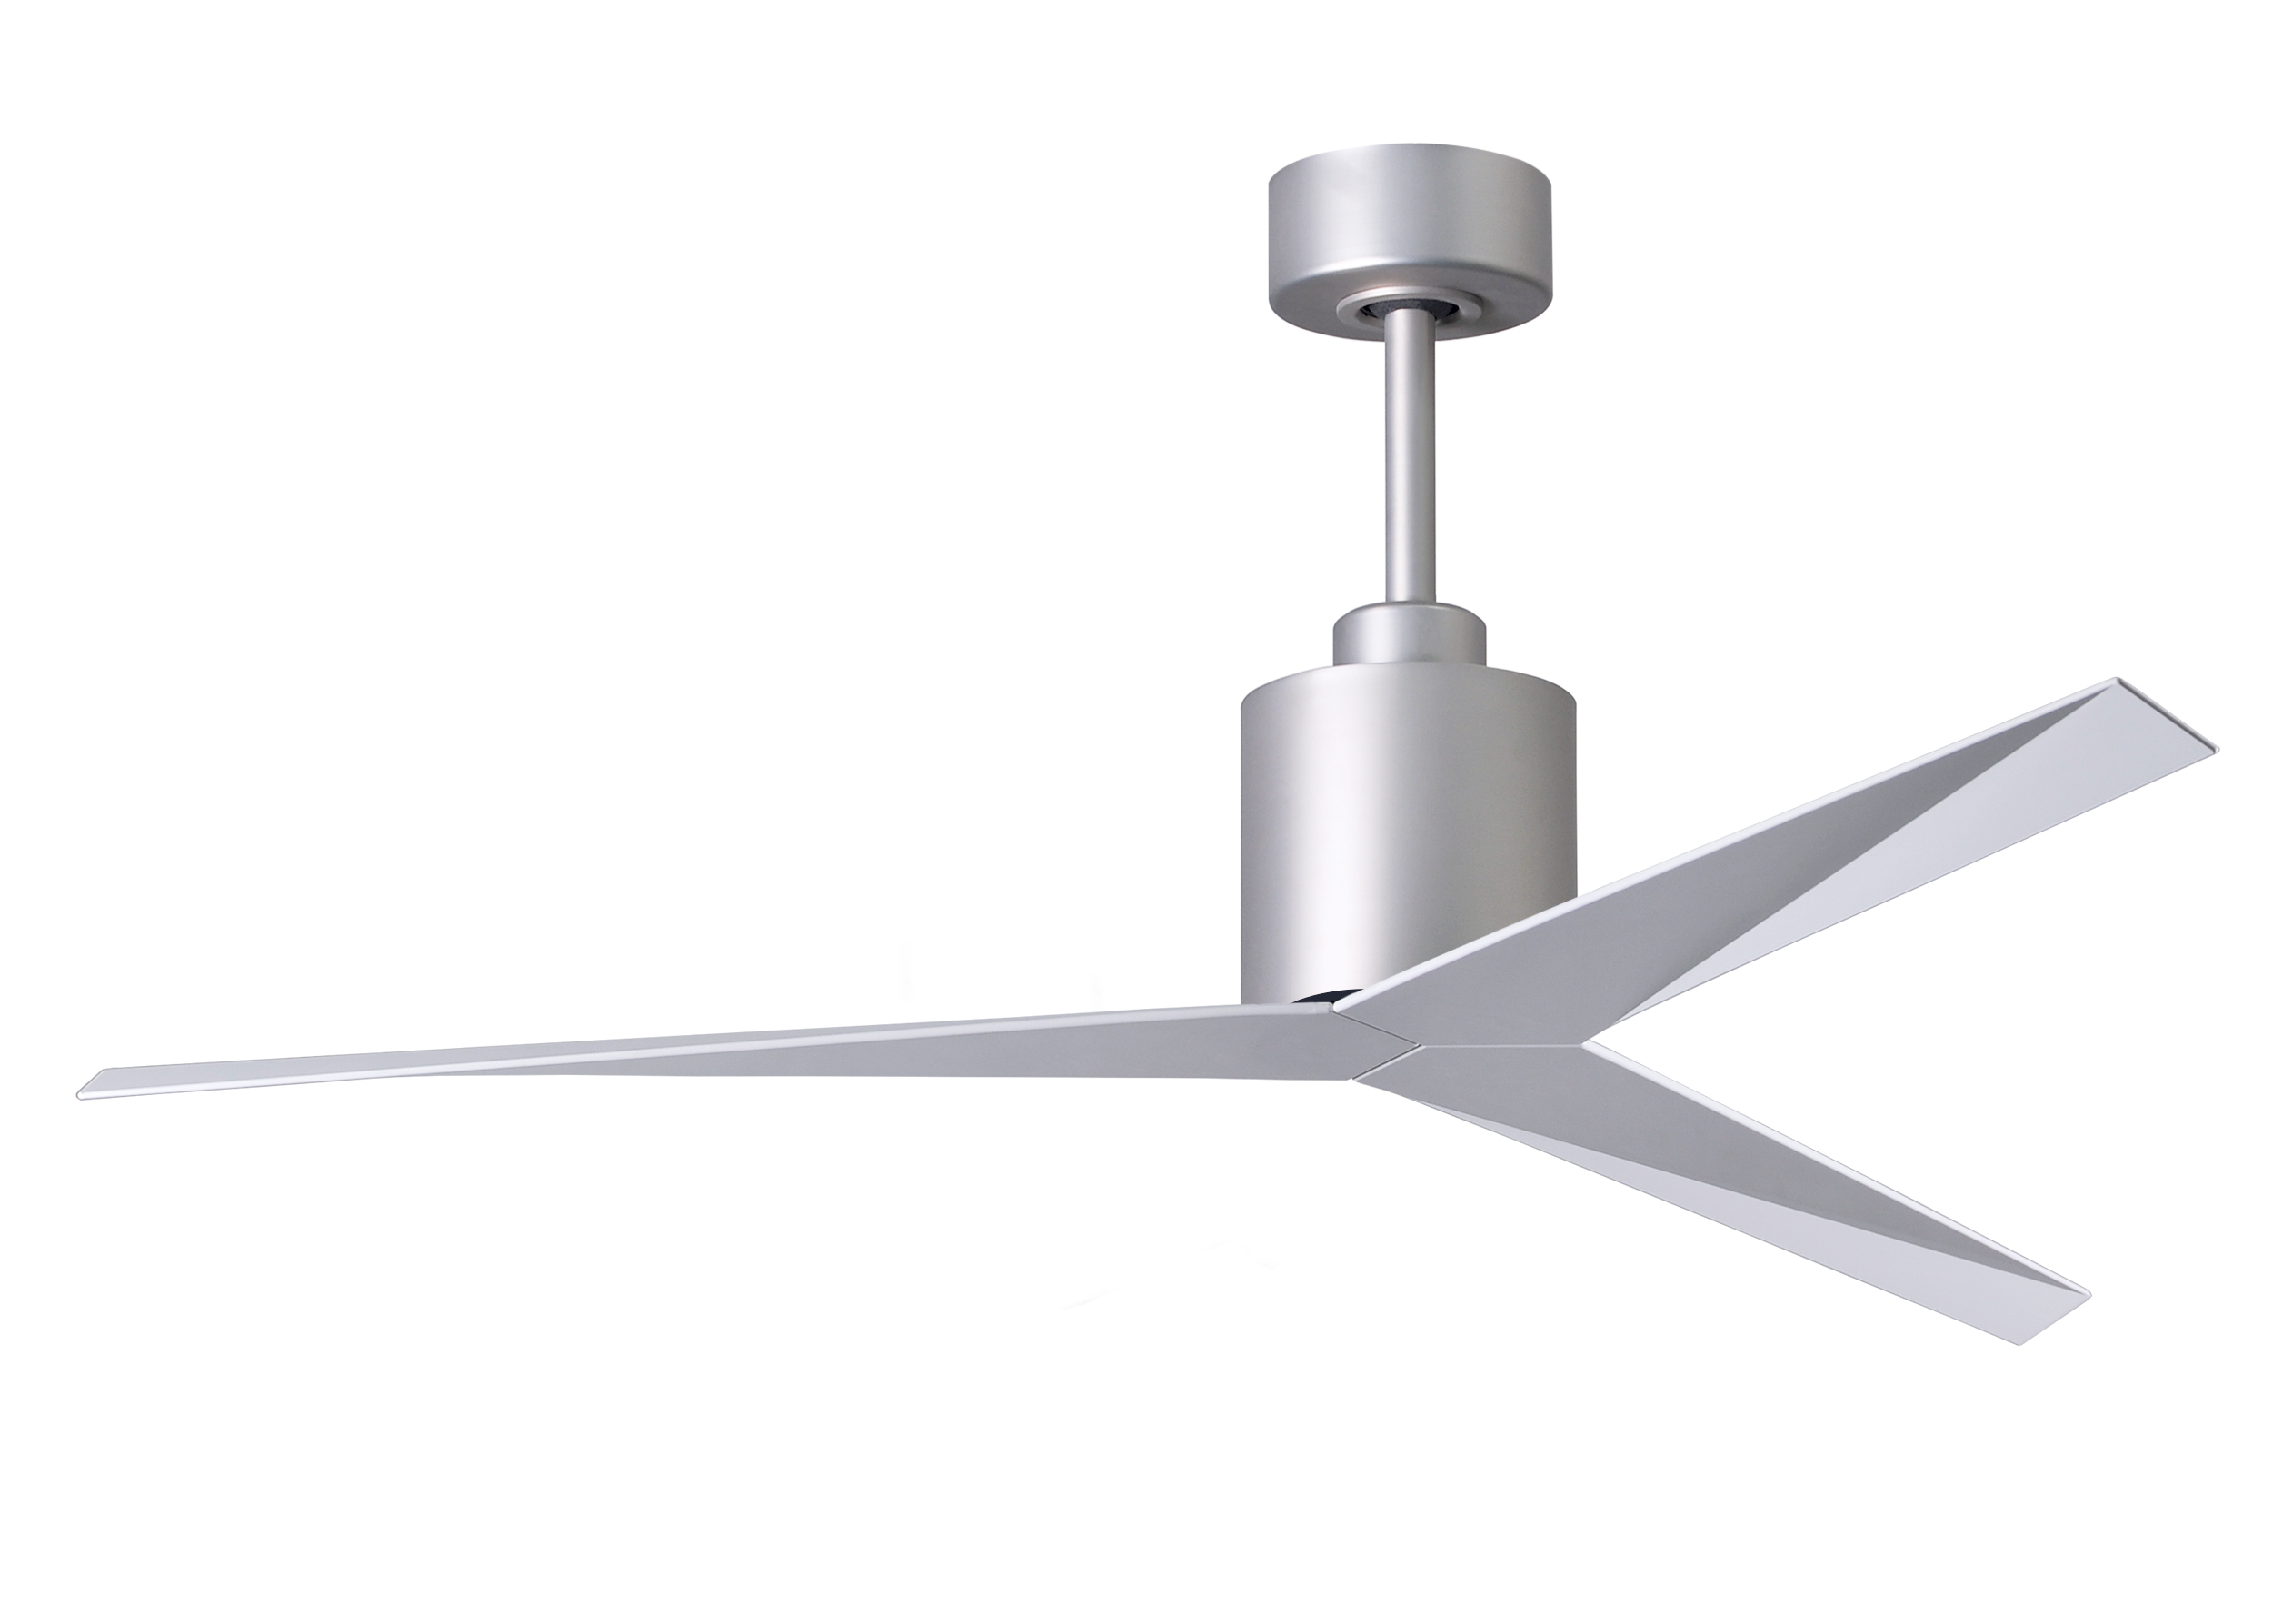 Eliza ceiling fan in brushed nickel with gloss white blades made